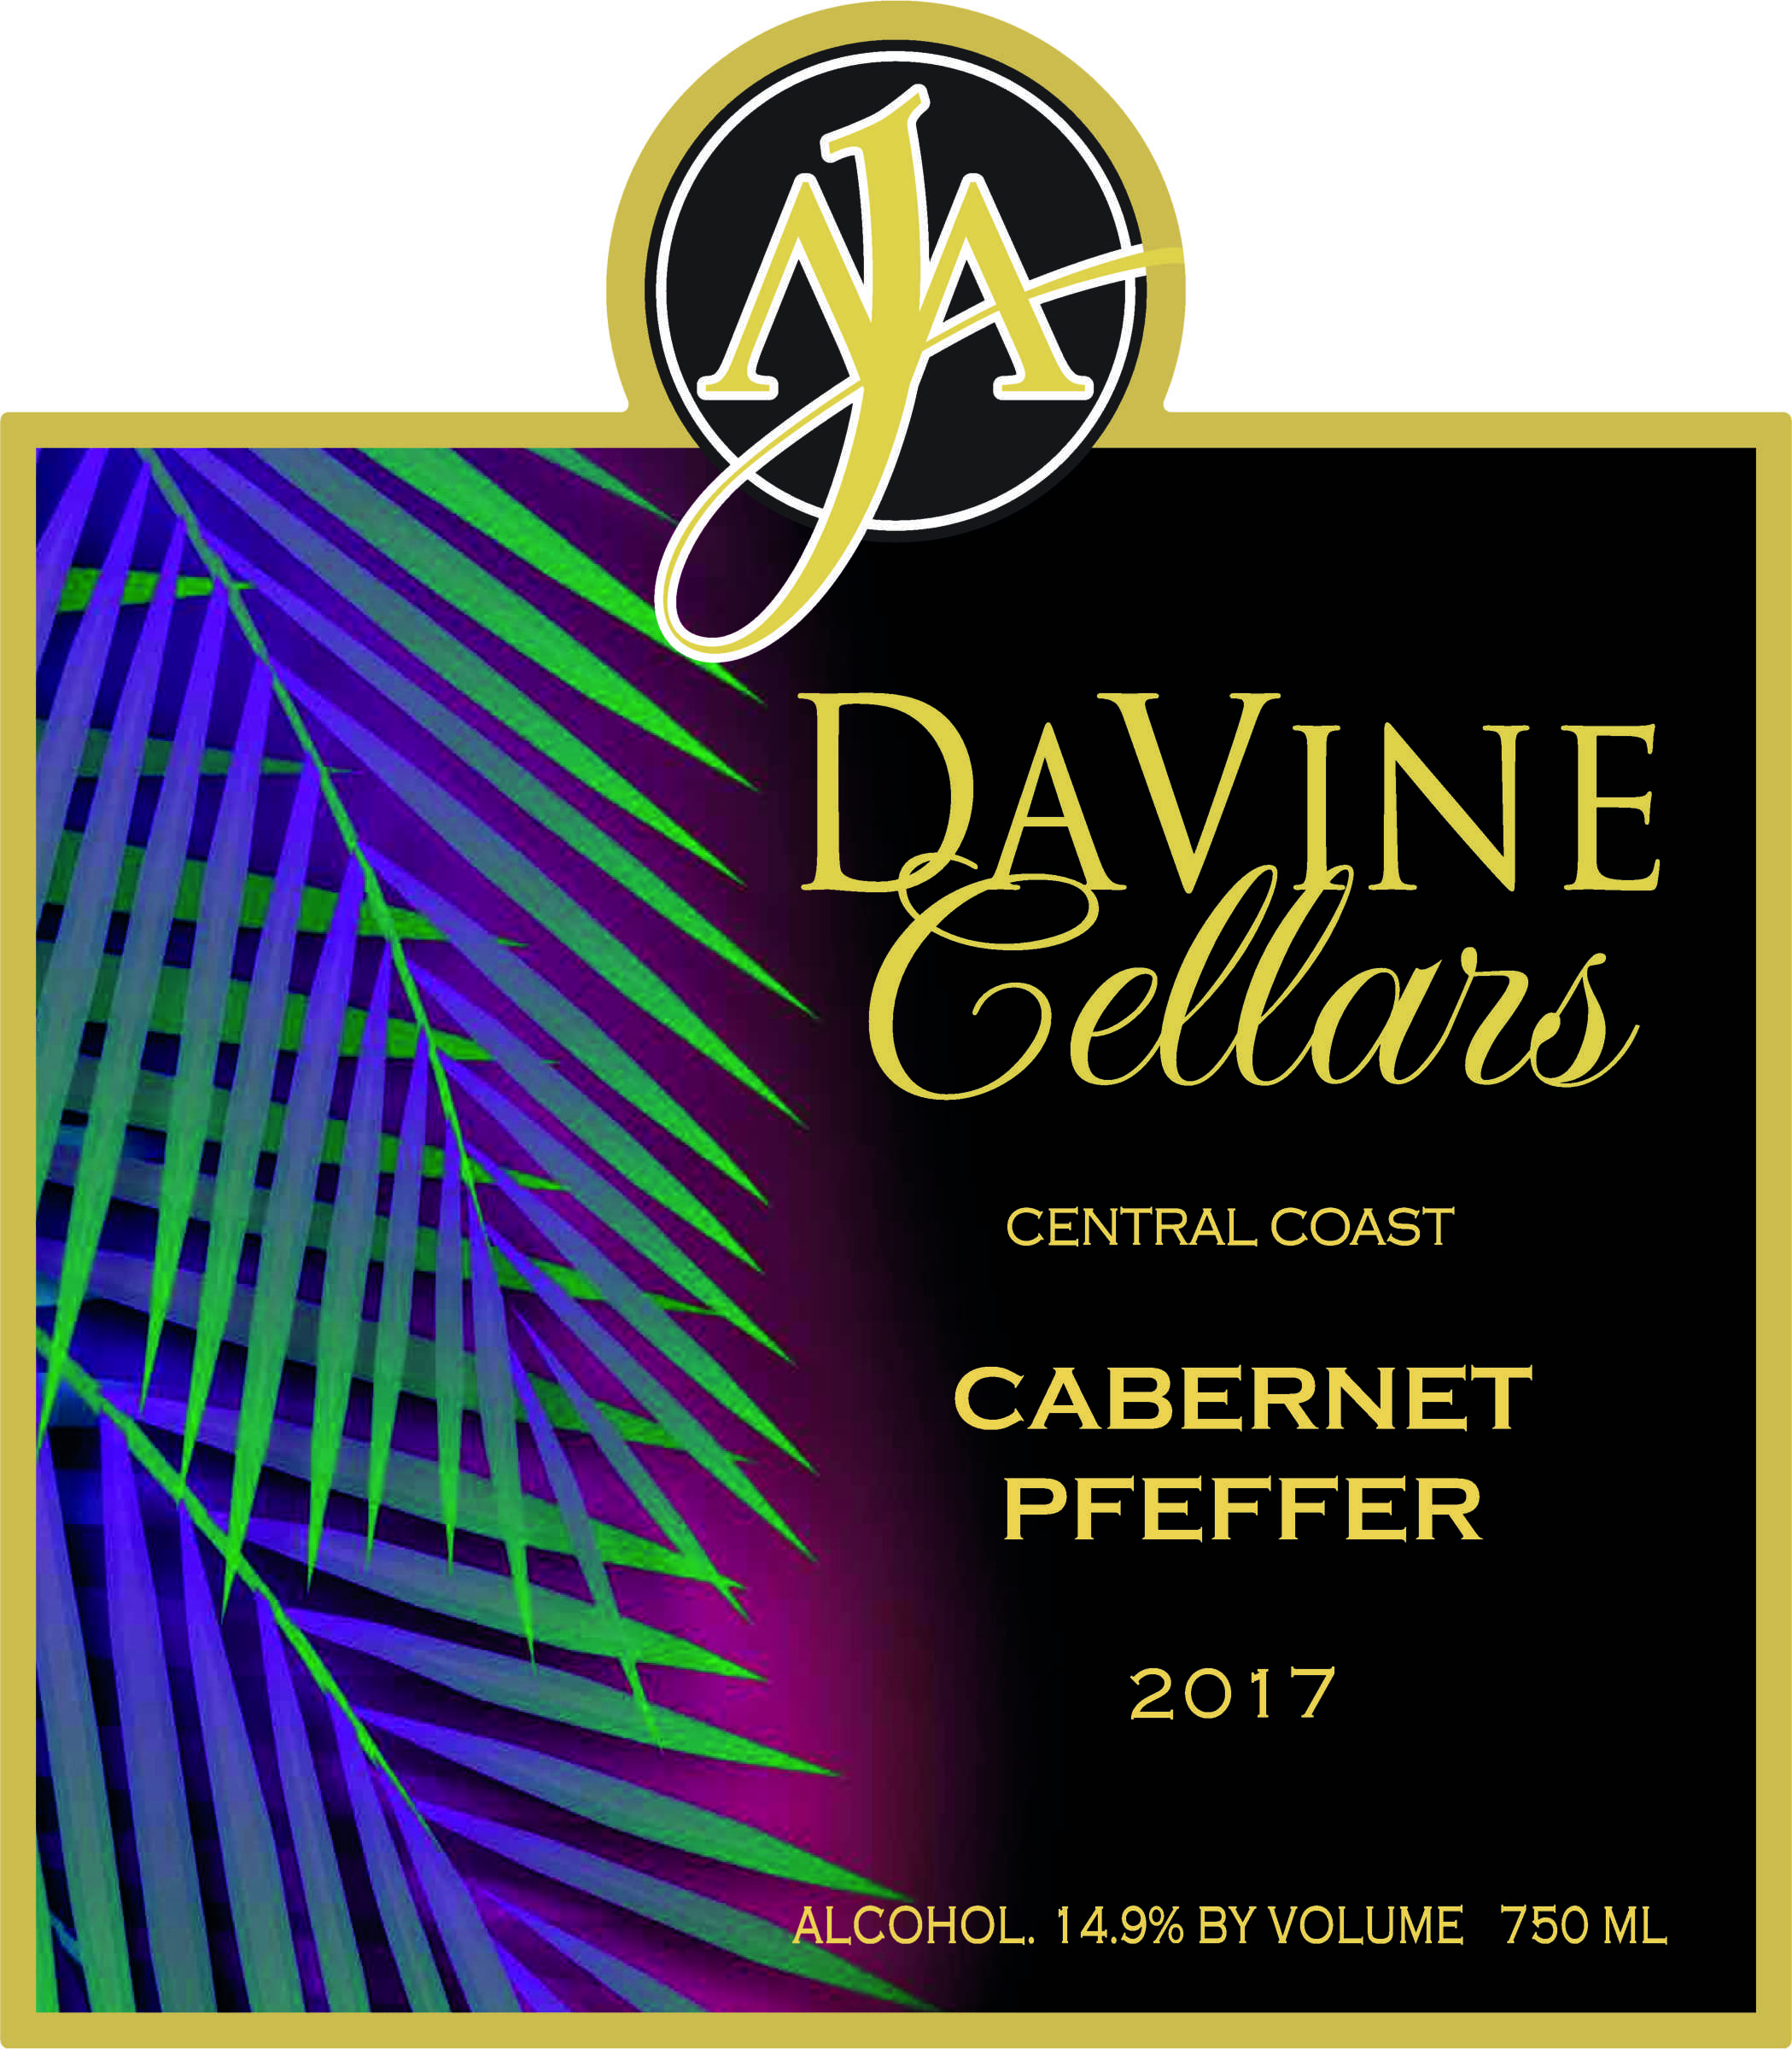 Product Image for 2017 Central Coast Pfeffer Cabernet "Charmer"